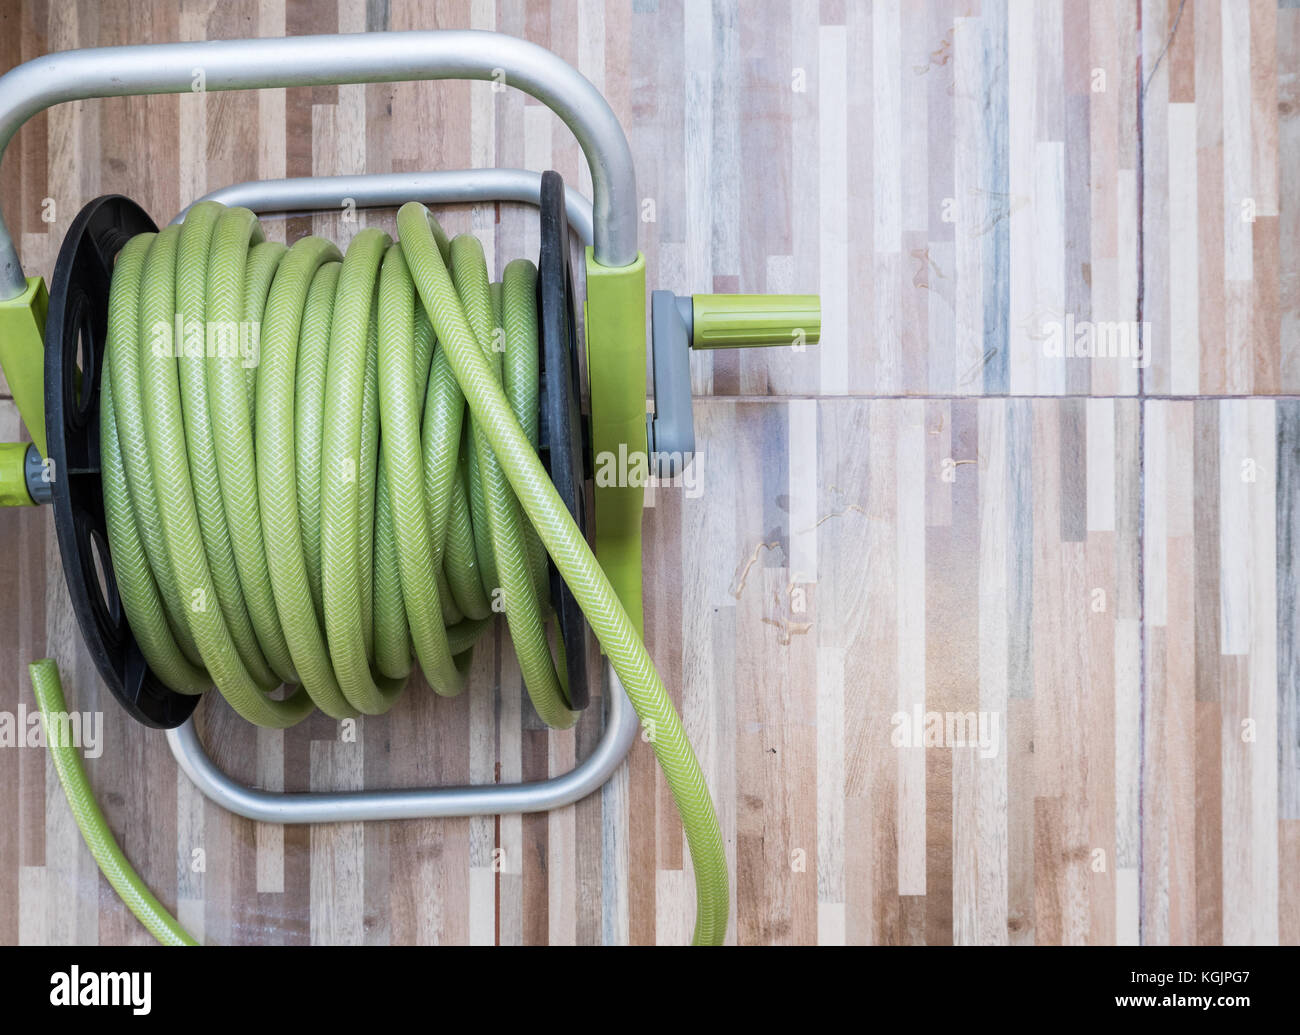 Green rubber hose of the plastic reel set on the wooden pattern tile for  use in the home garden Stock Photo - Alamy